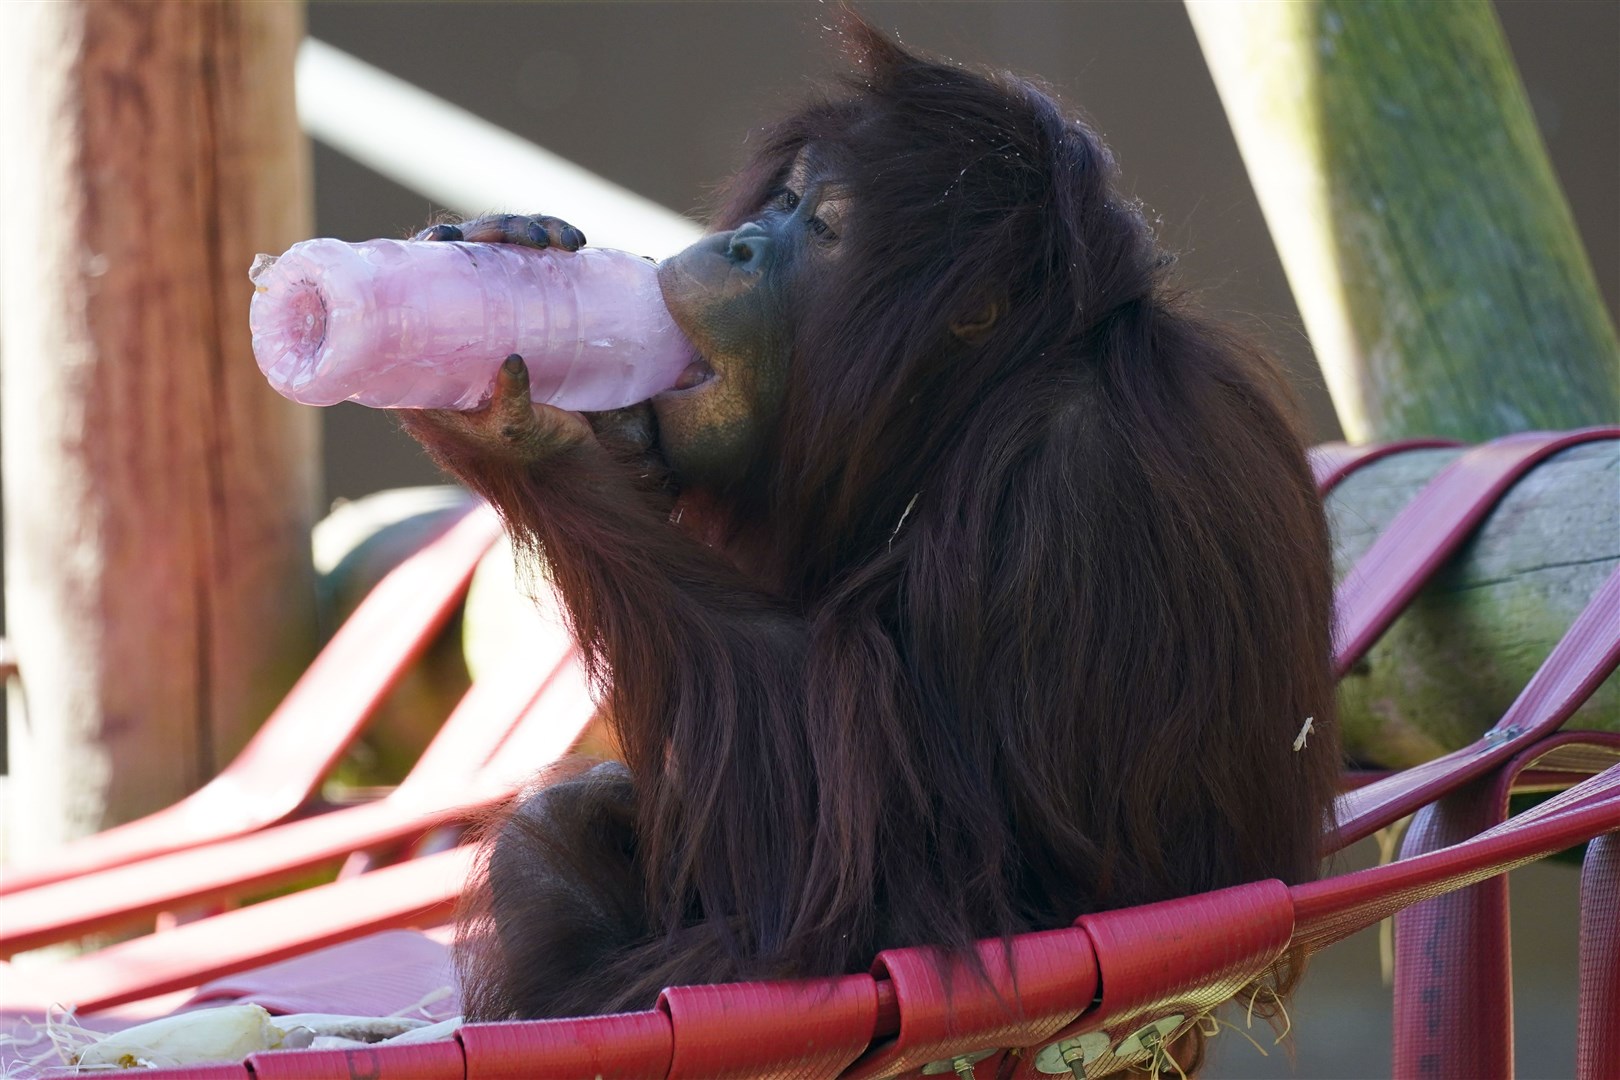 Kayan the orangutan licks a frozen juice bottle at Twycross Zoo in Leicestershire (Jacob King/PA)